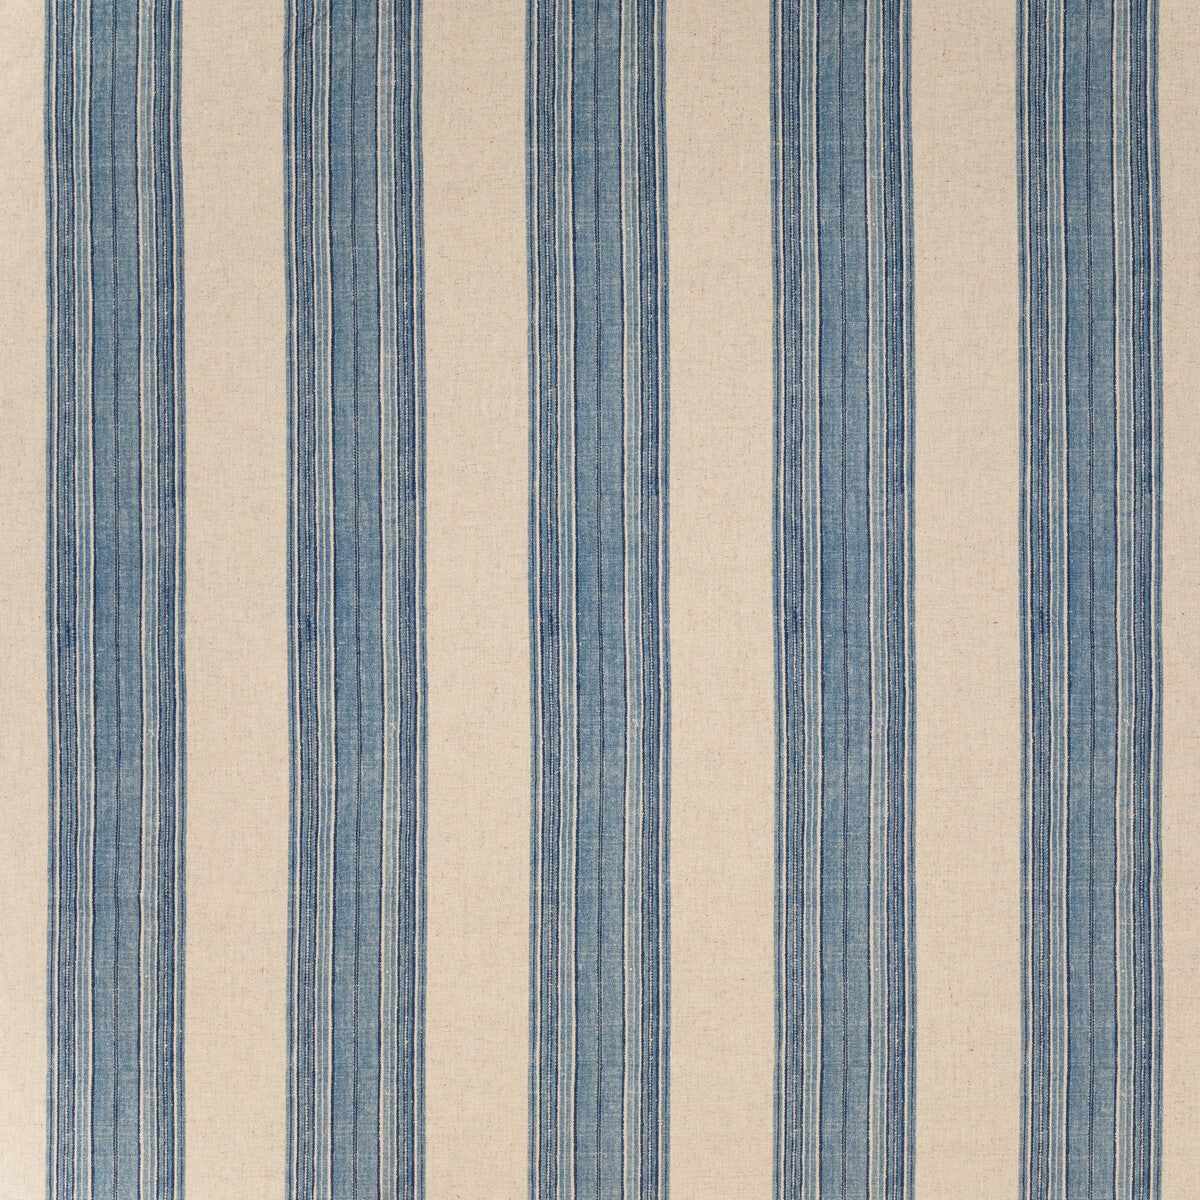 Mifflin Stripe fabric in blue color - pattern BFC-3709.5.0 - by Lee Jofa in the Blithfield Eden collection